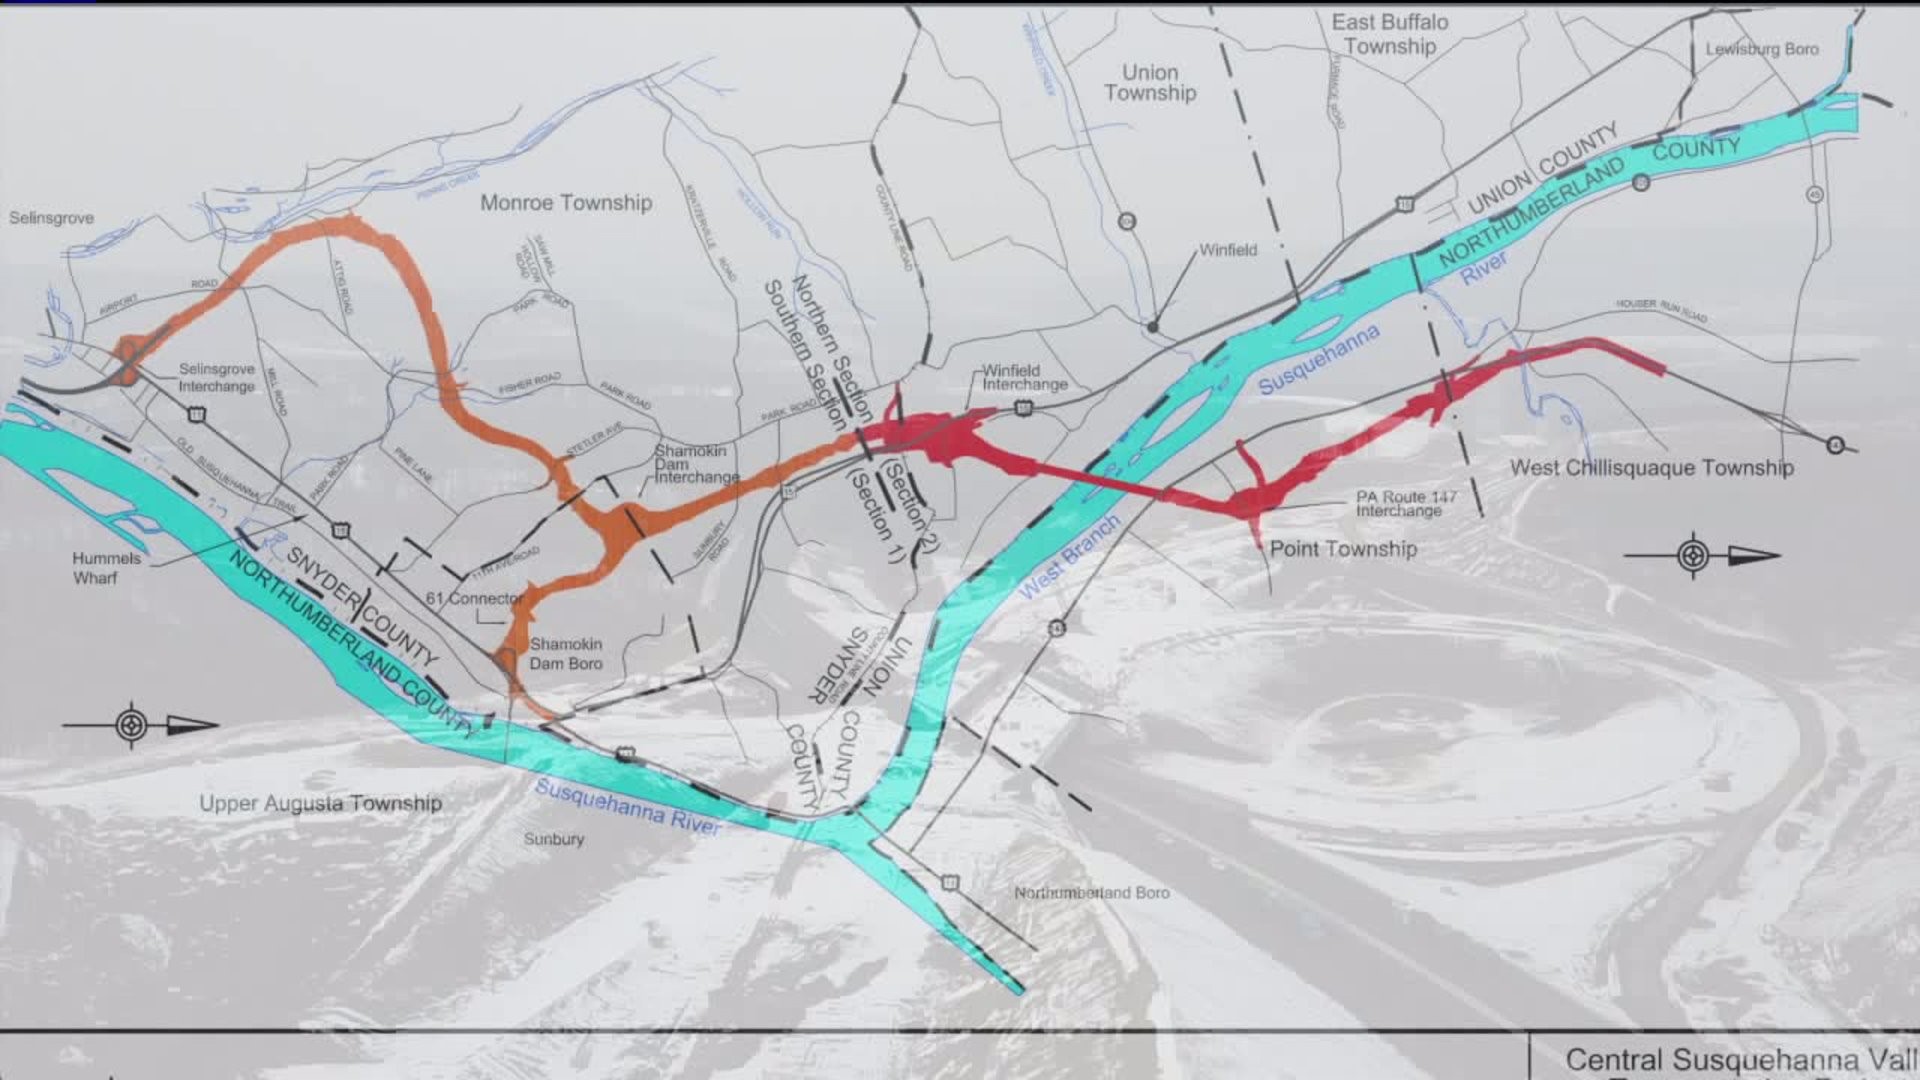 PennDOT: Central Susquehanna Valley Thruway Work to Cost More, Take Longer